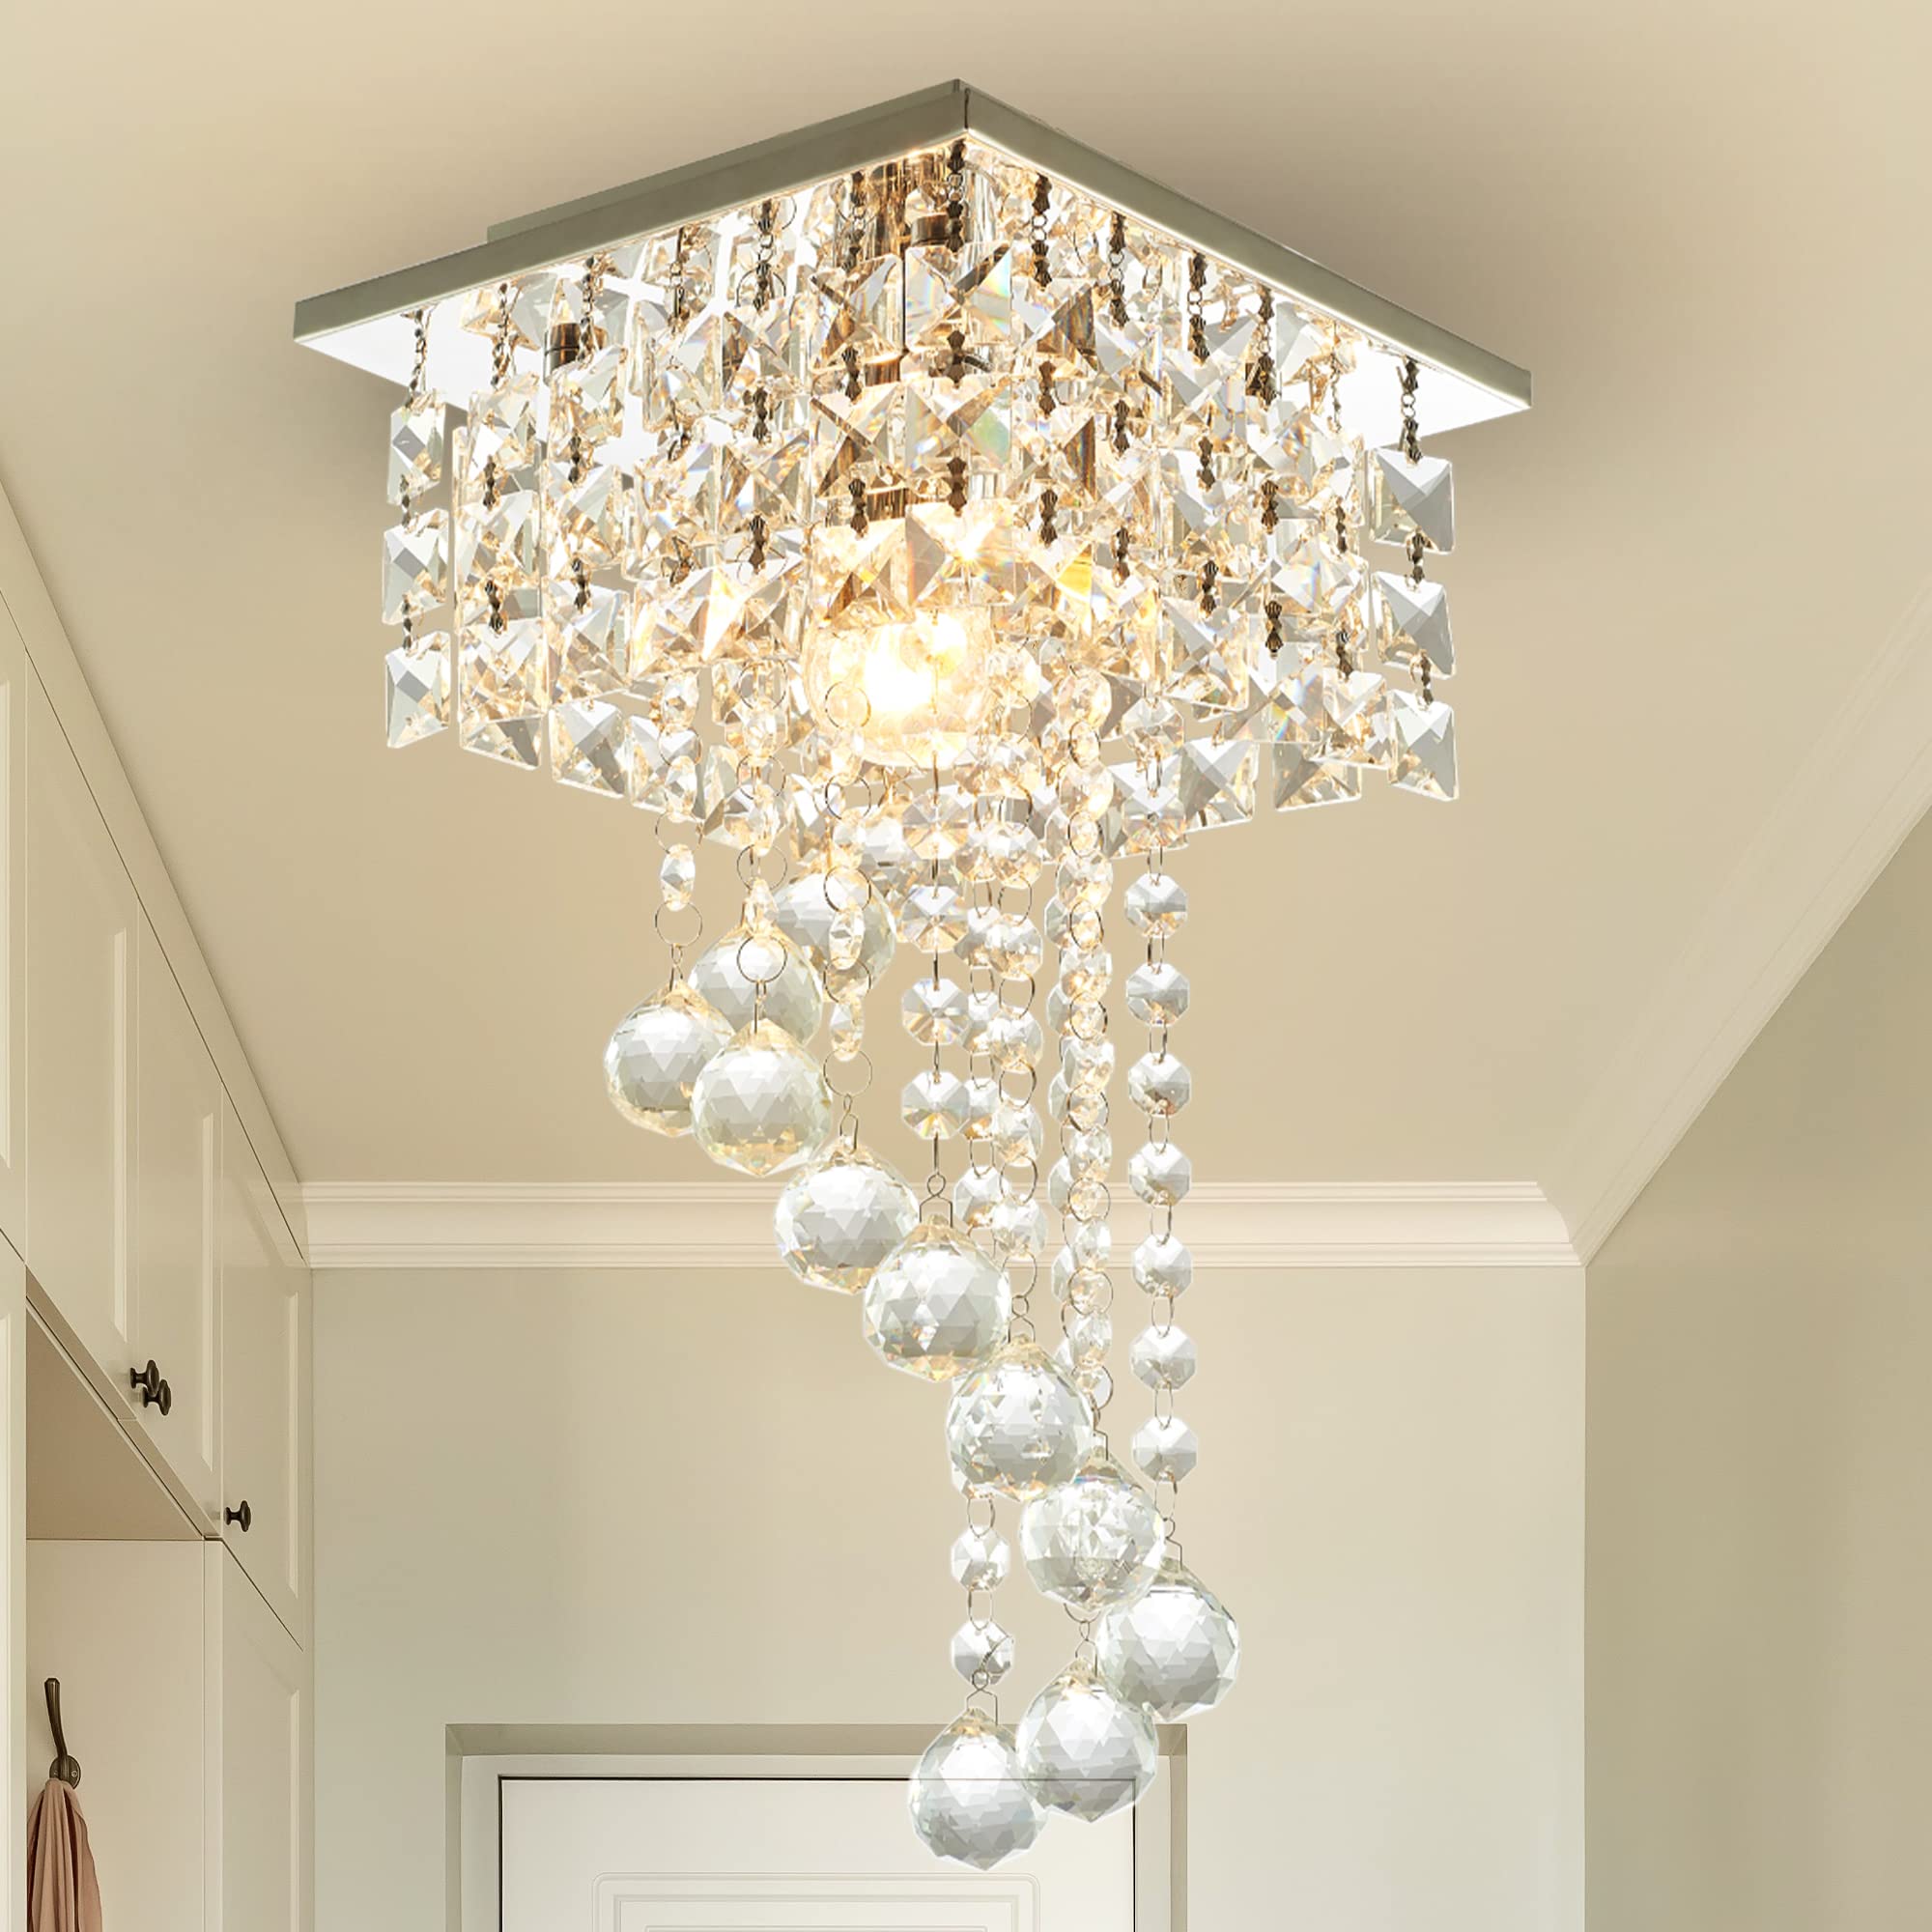 Finktonglan Mini Crystal Chandelier, Modern Small Chandeliers Ceiling Light Fixture Square Flush Mount Ceiling Lights for Hallway Bedroom Dining Room Foyer Kitchen (E26)